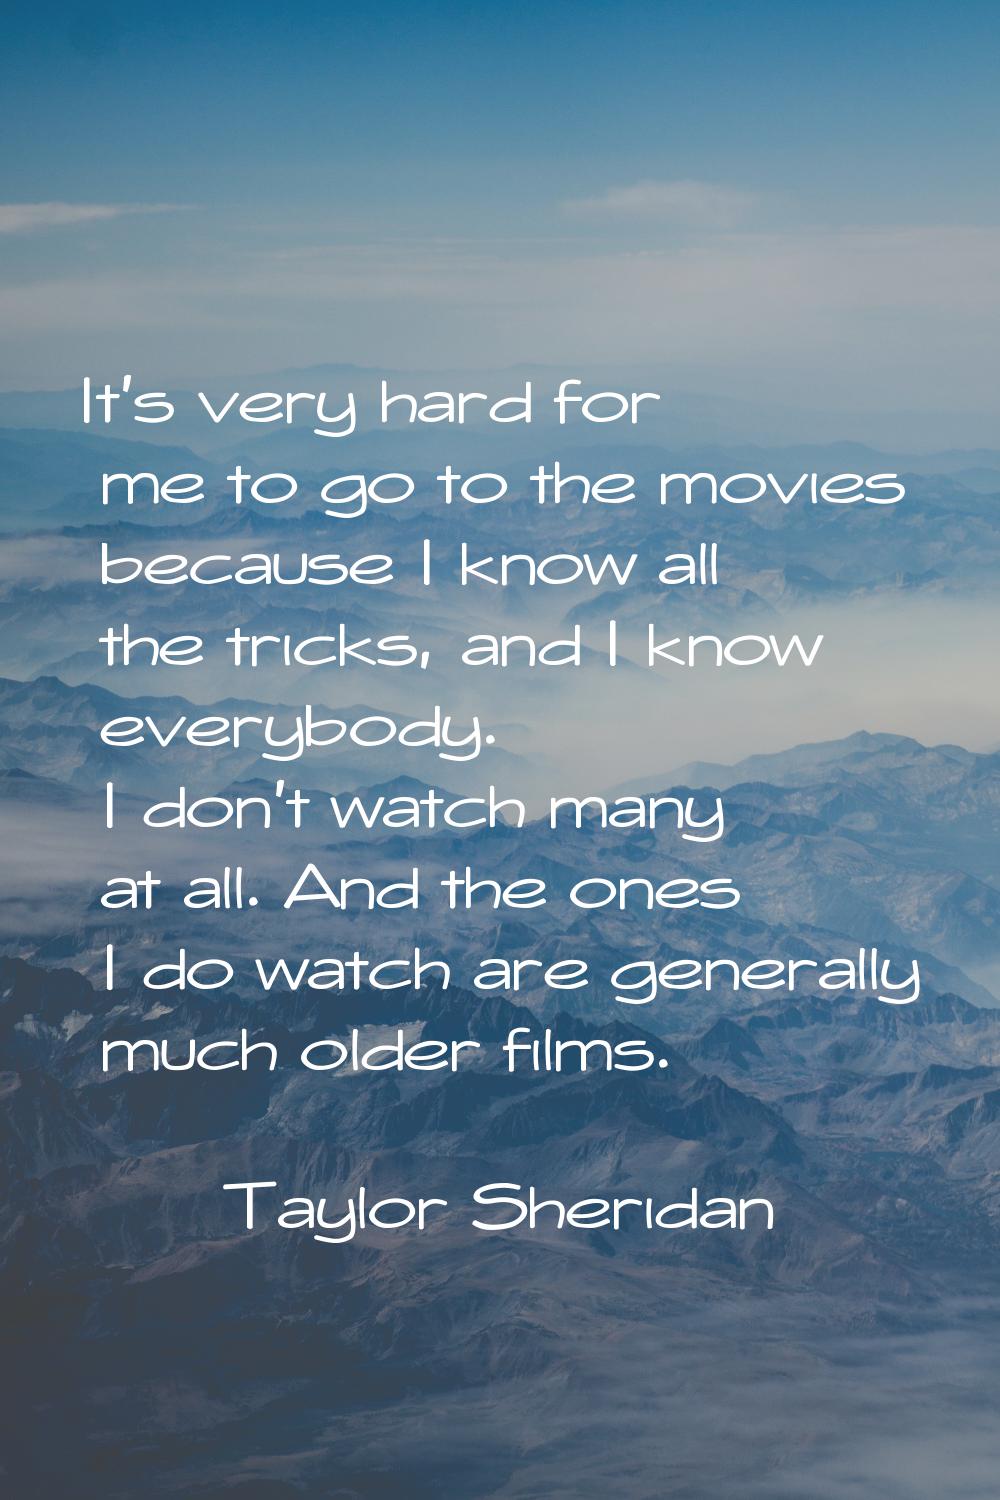 It's very hard for me to go to the movies because I know all the tricks, and I know everybody. I do